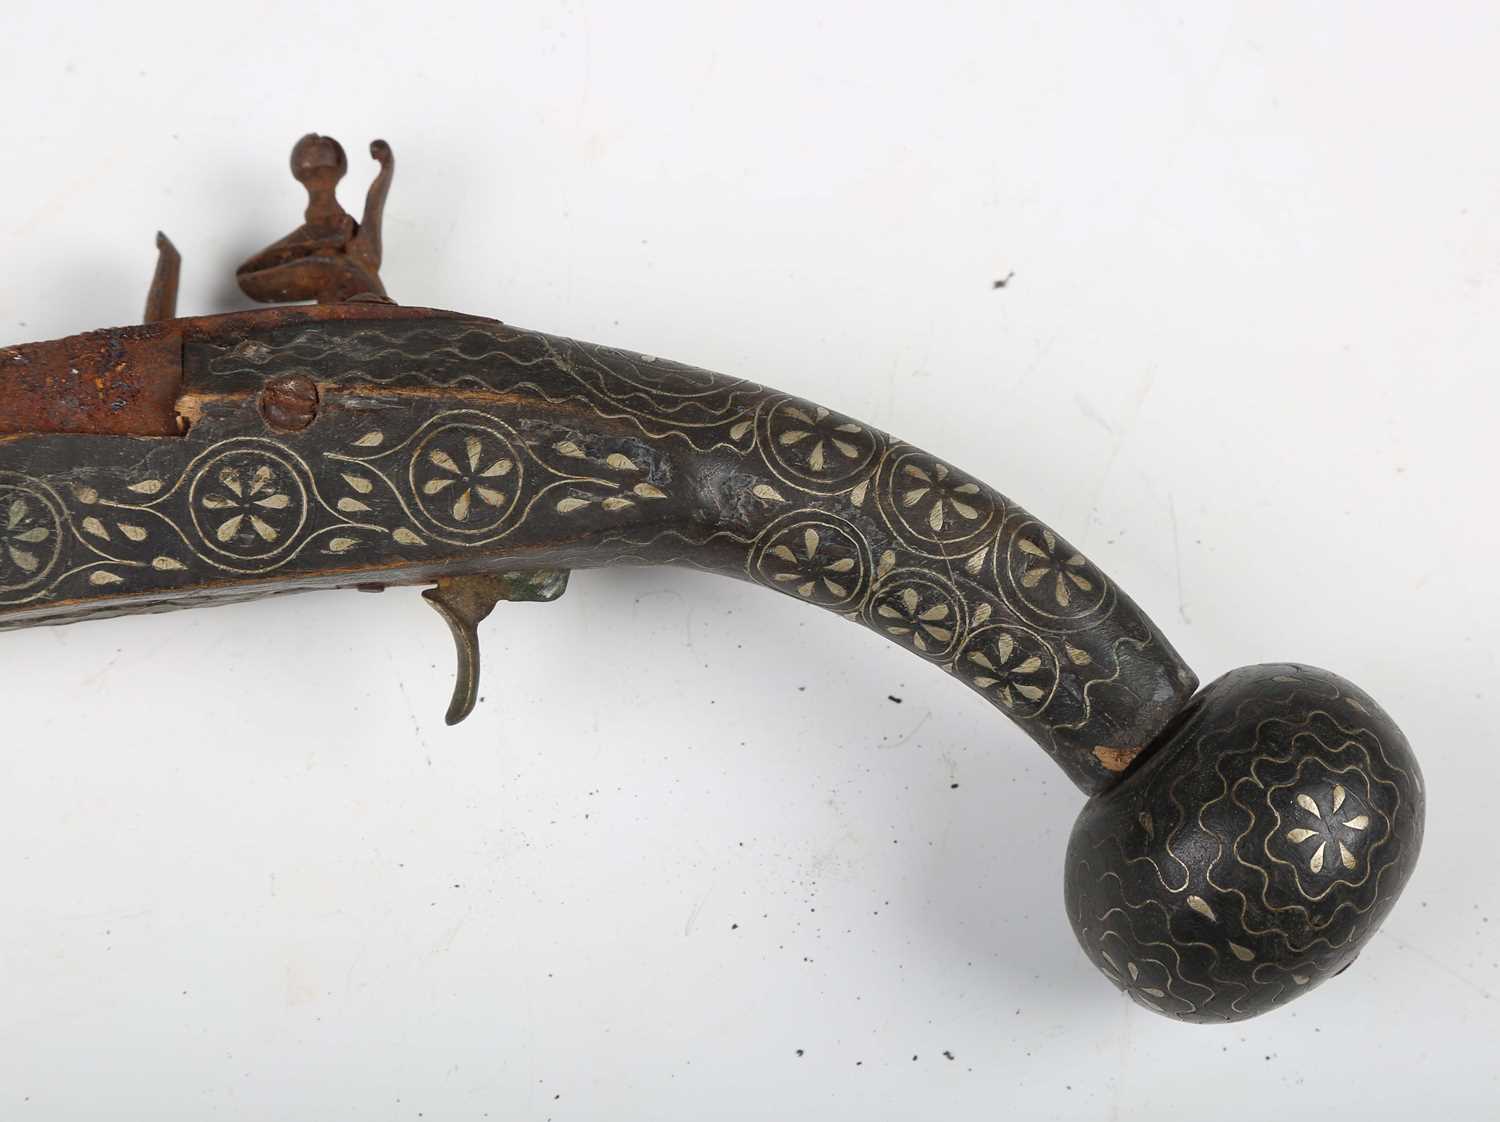 A pair of 18th century and later Middle Eastern flintlock pistols with linear-sighted round barrels, - Image 6 of 20